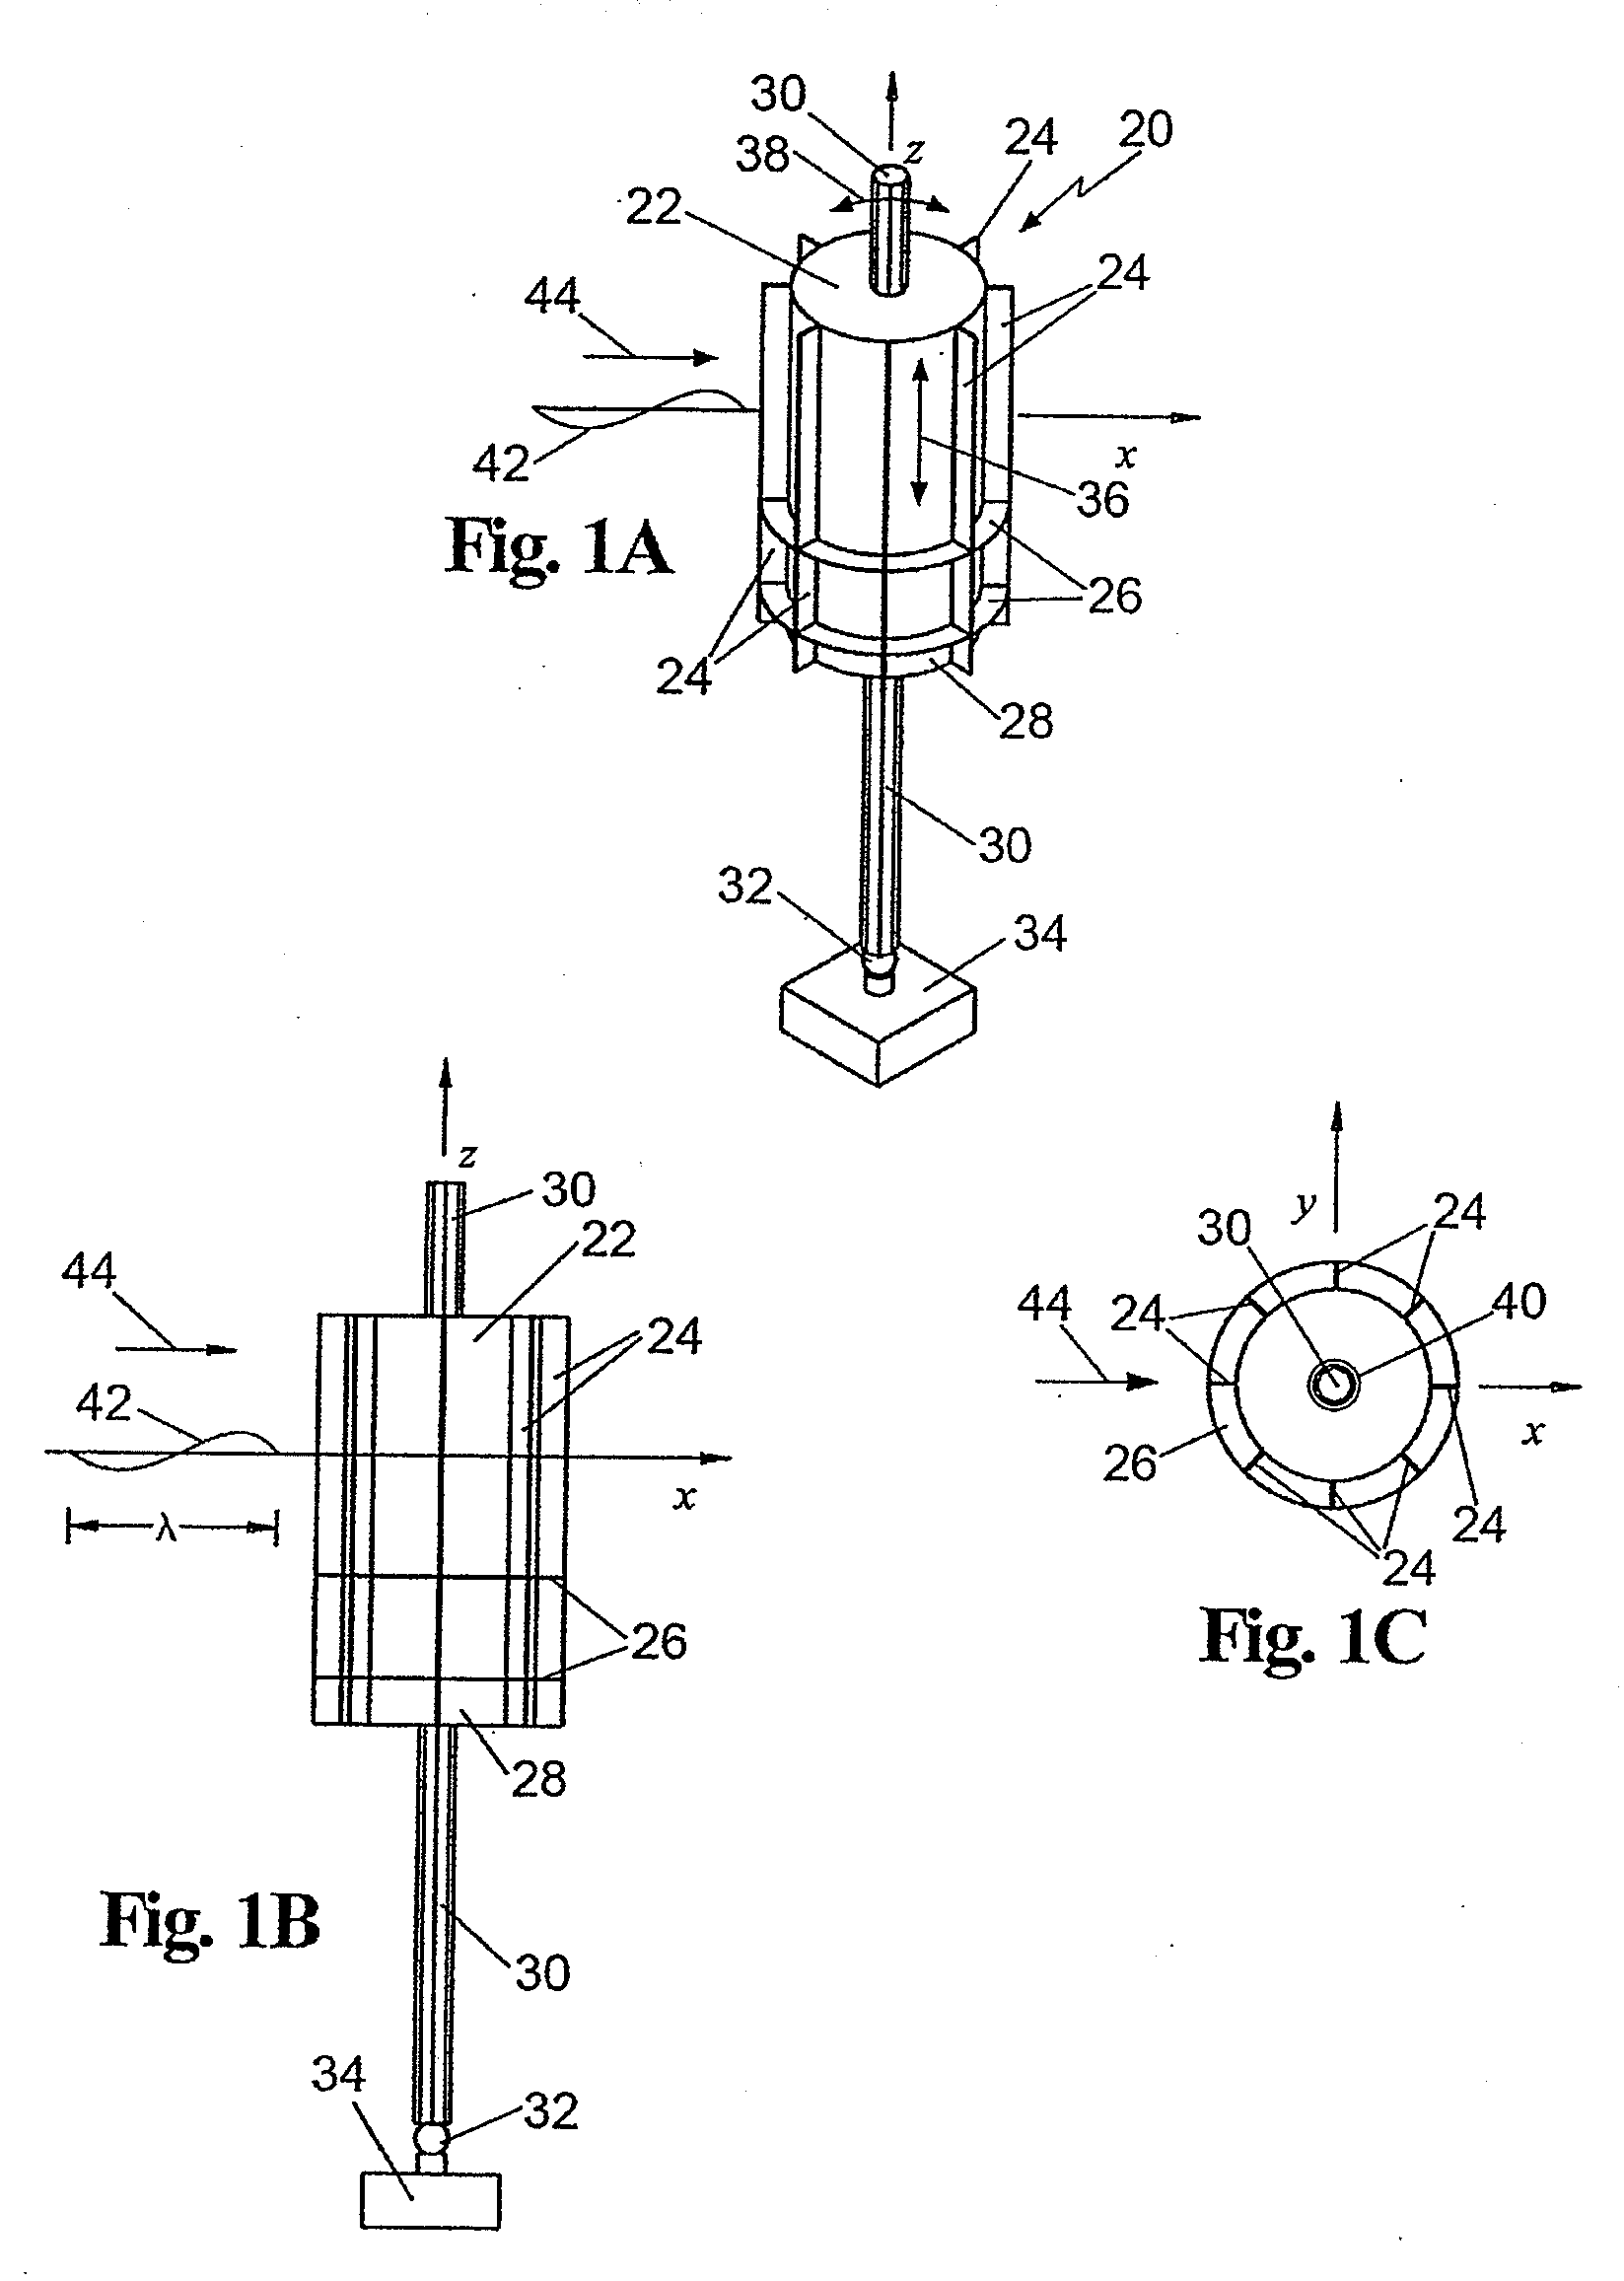 Buoy systems and methods for minimizing beach erosion and other applications for attenuating water surface activity